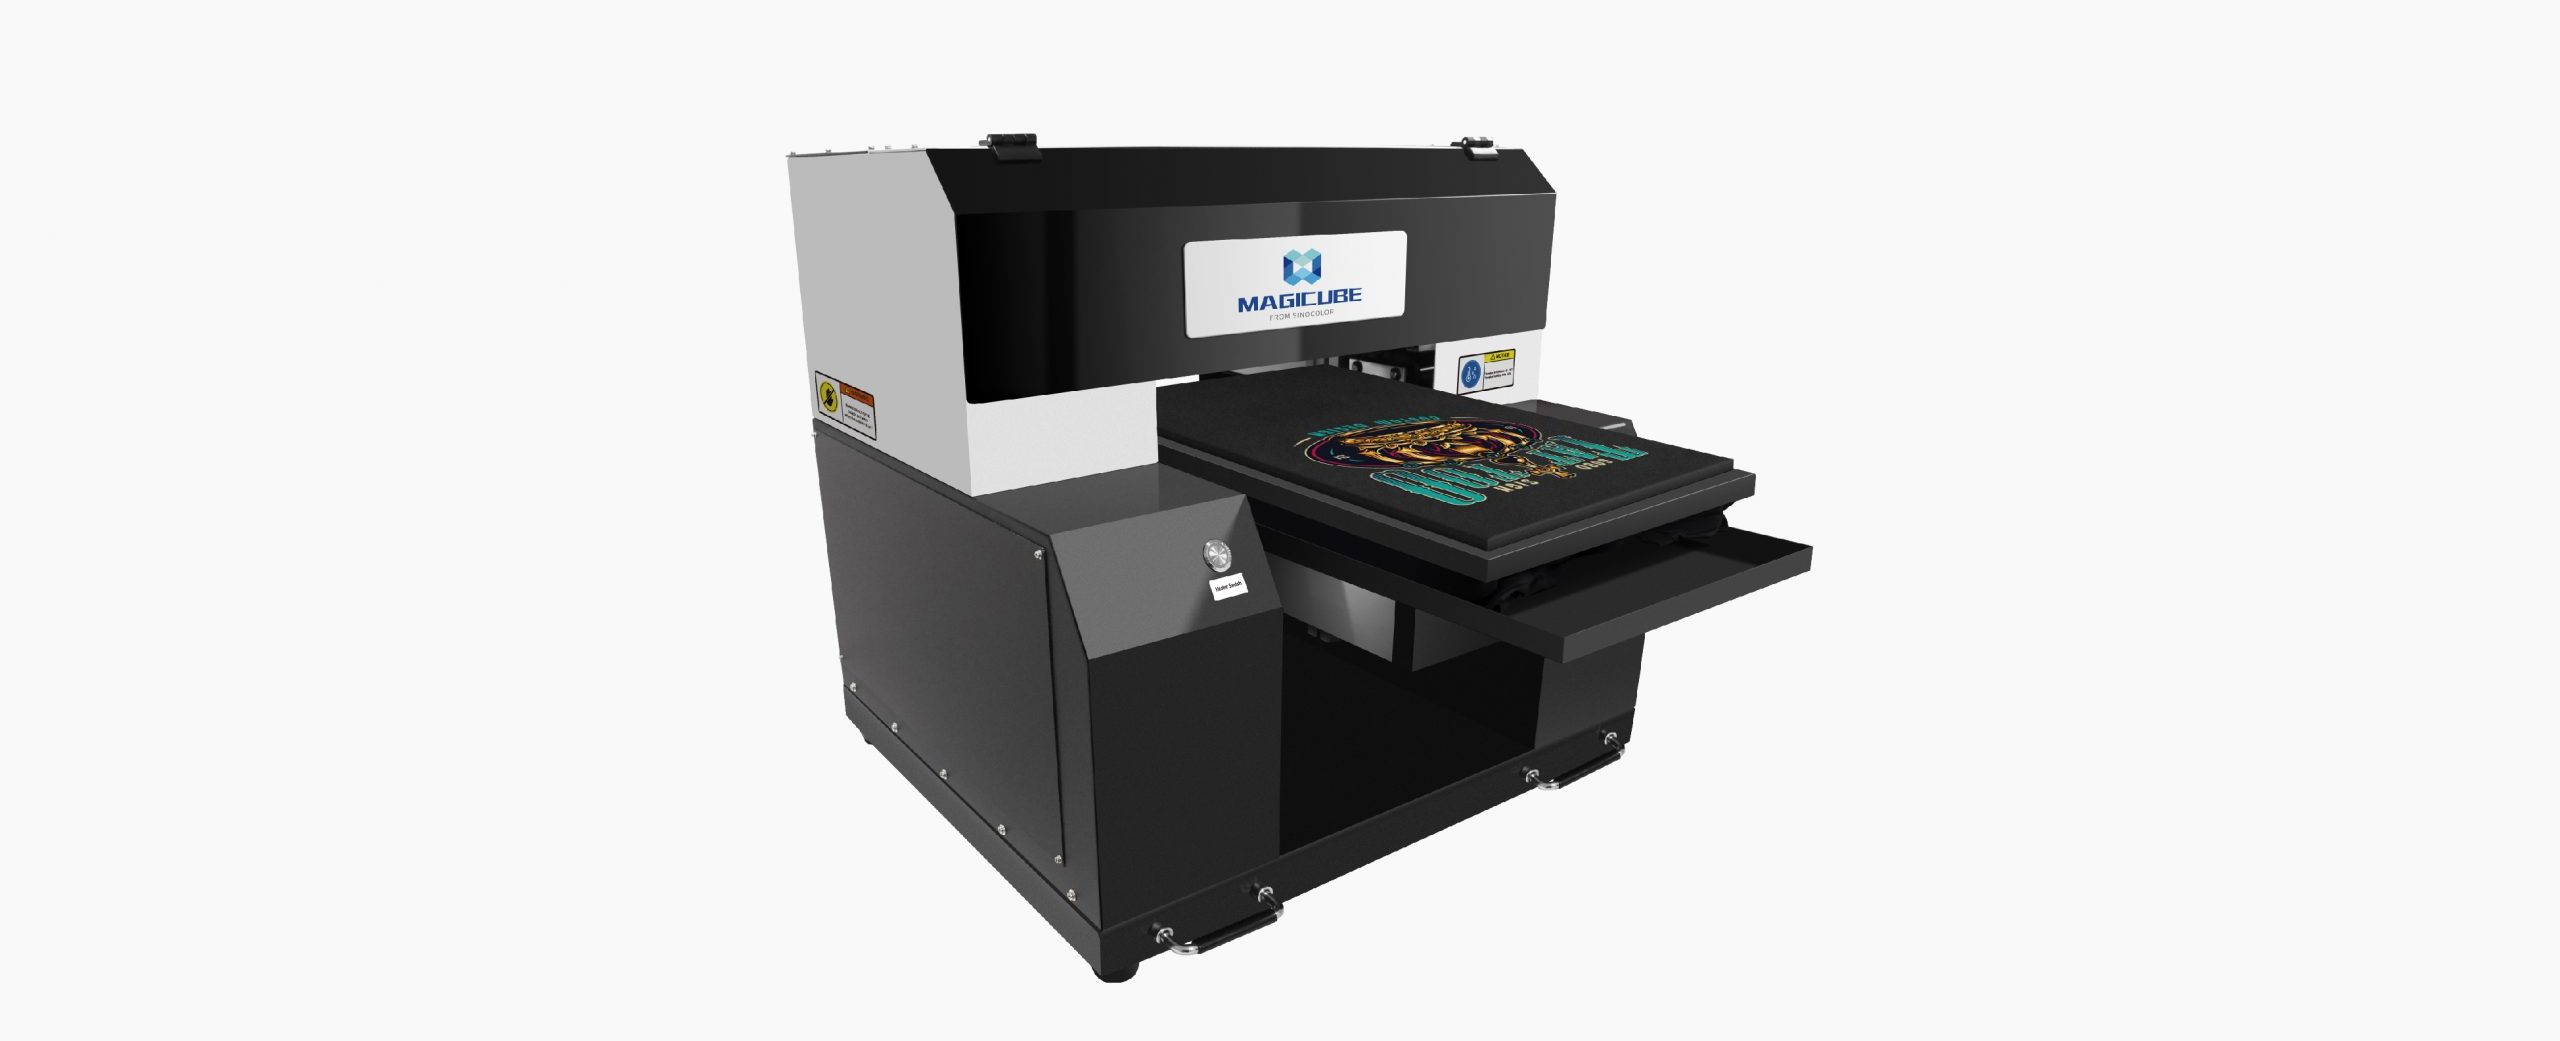 /products/textile-printer/dtg-printer/a3-printer.html images